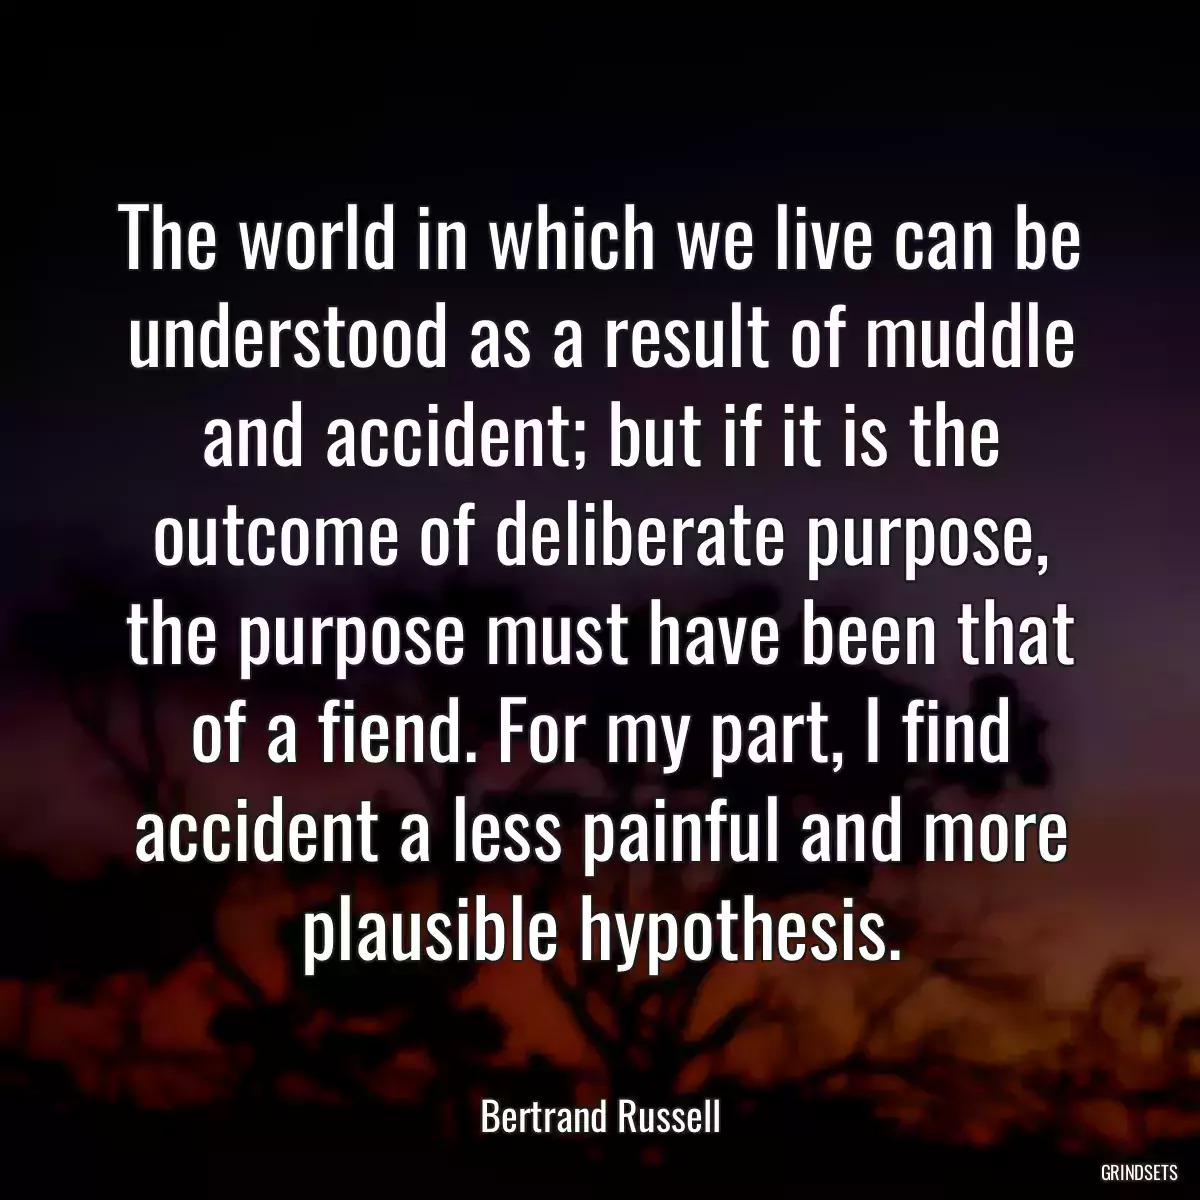 The world in which we live can be understood as a result of muddle and accident; but if it is the outcome of deliberate purpose, the purpose must have been that of a fiend. For my part, I find accident a less painful and more plausible hypothesis.